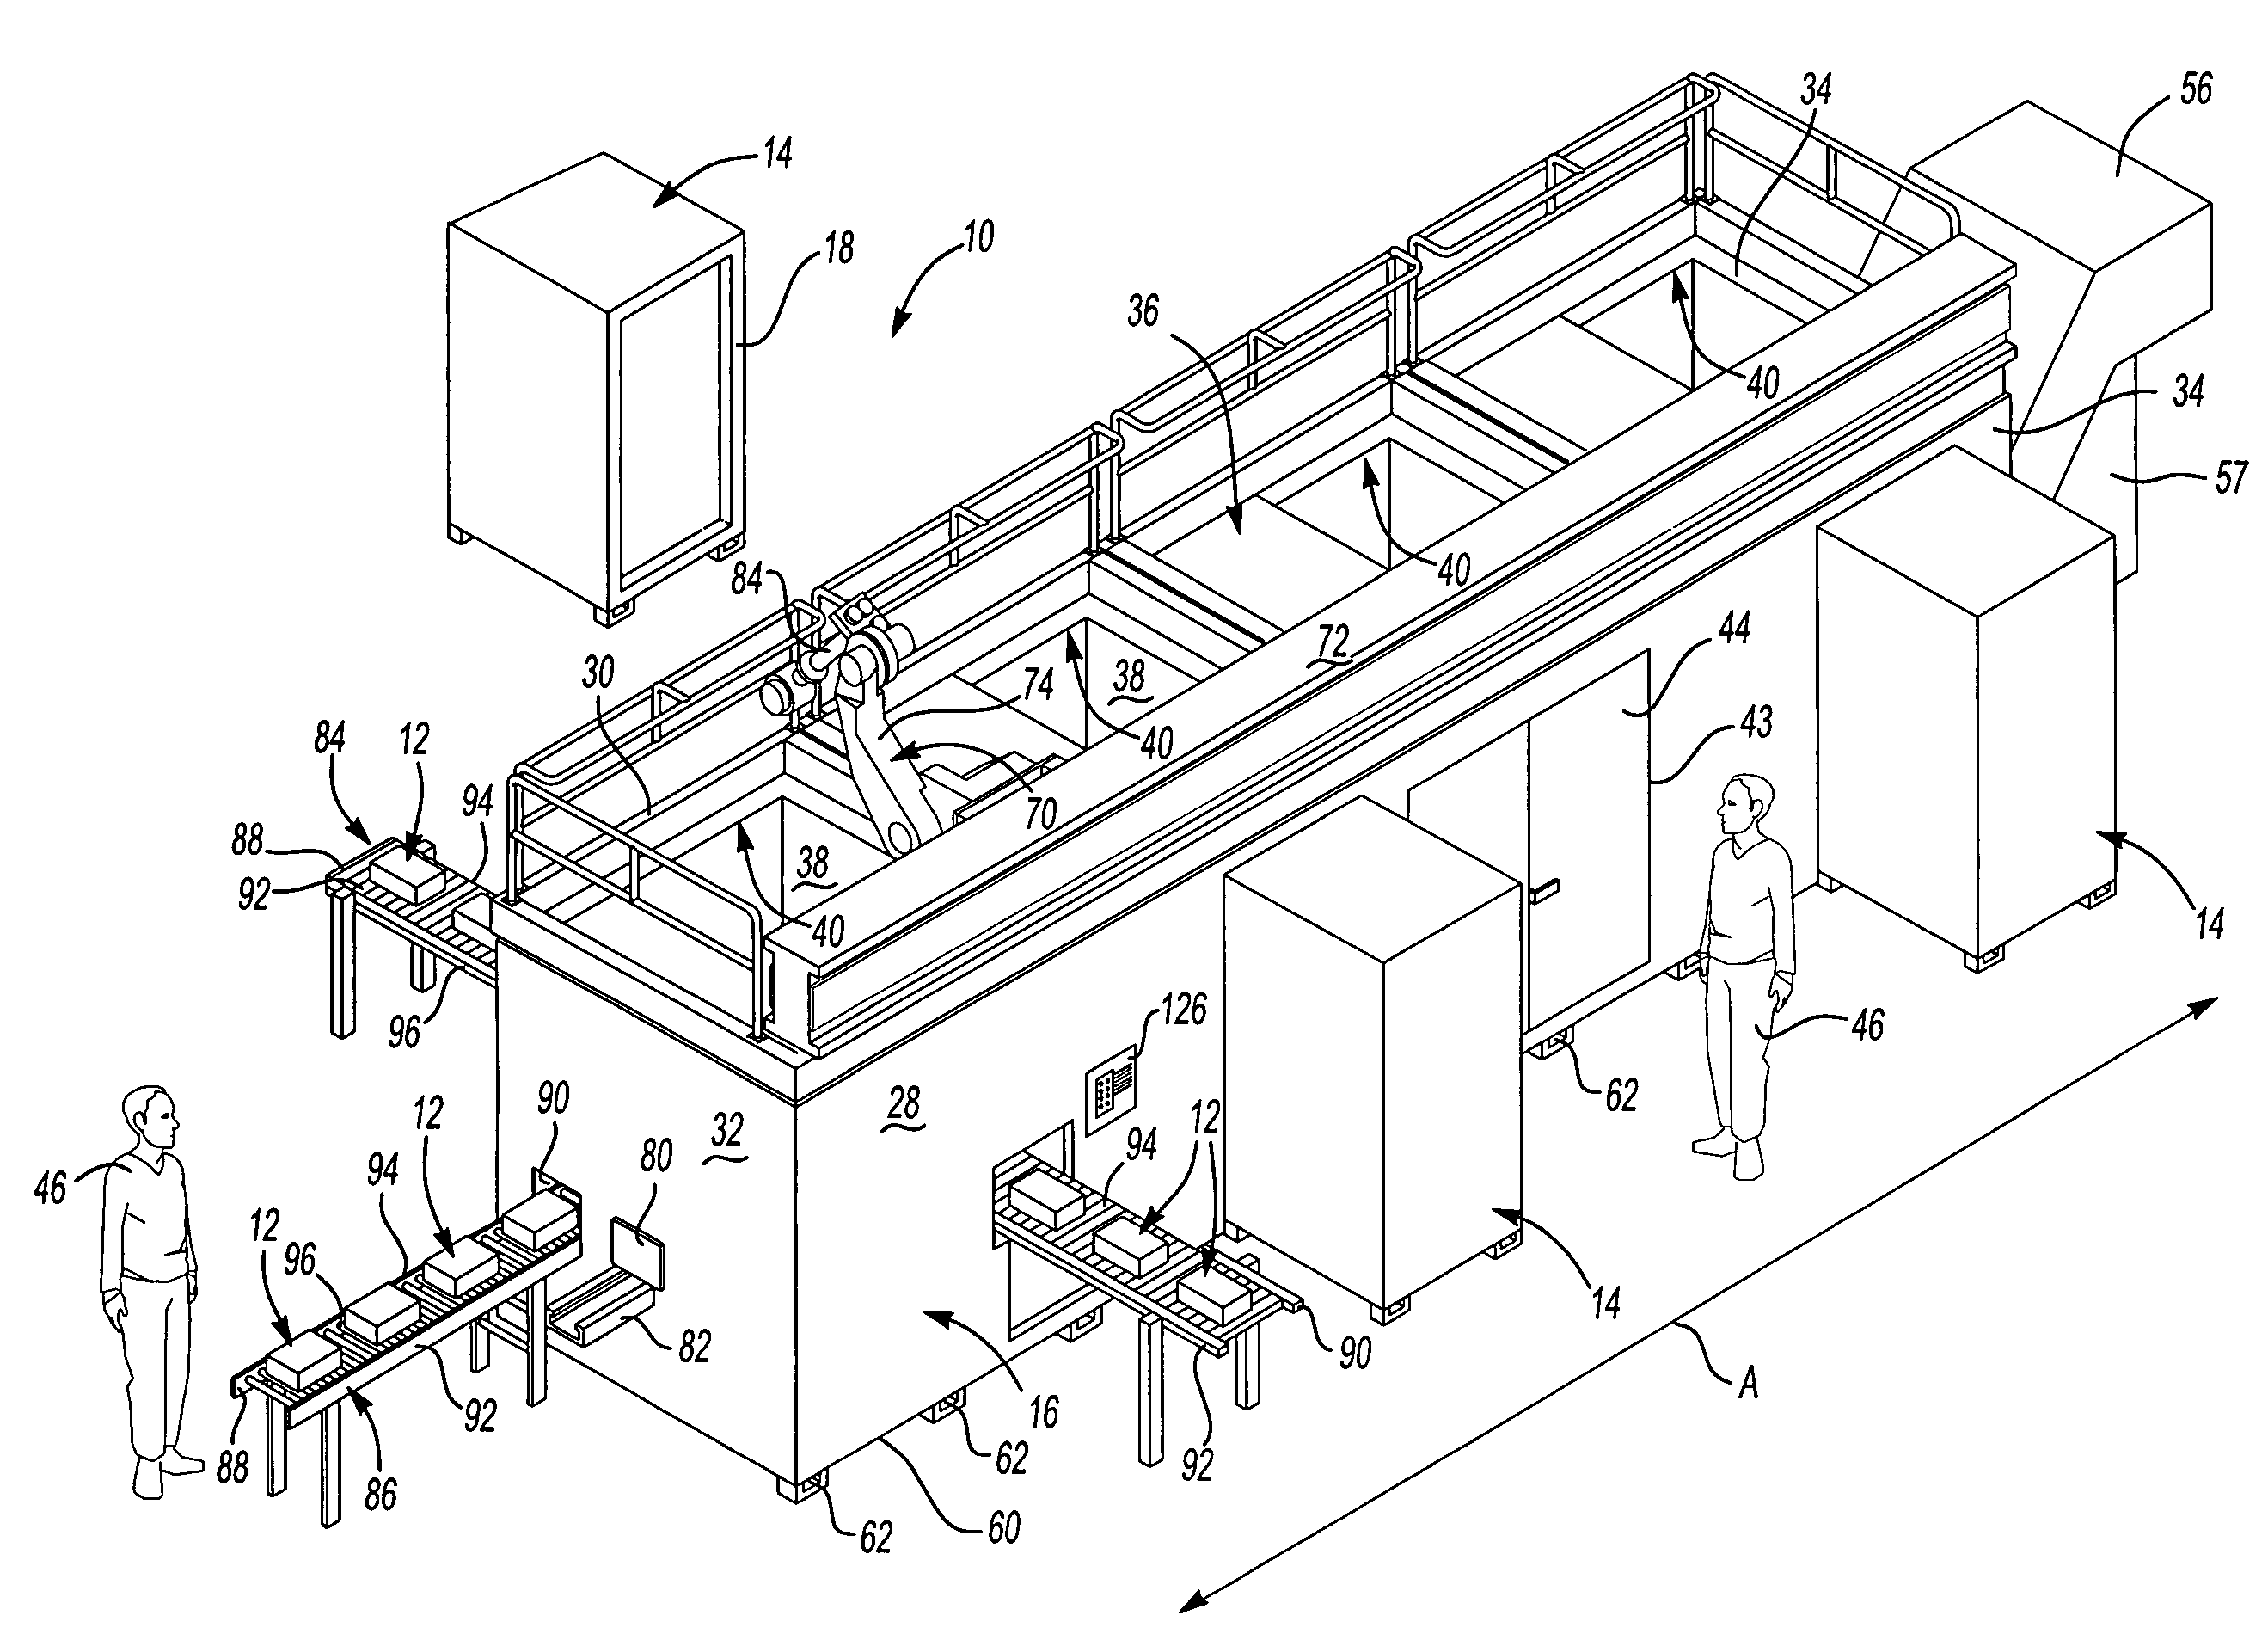 Integrated machining module for processing workpieces and a method of assembling the same